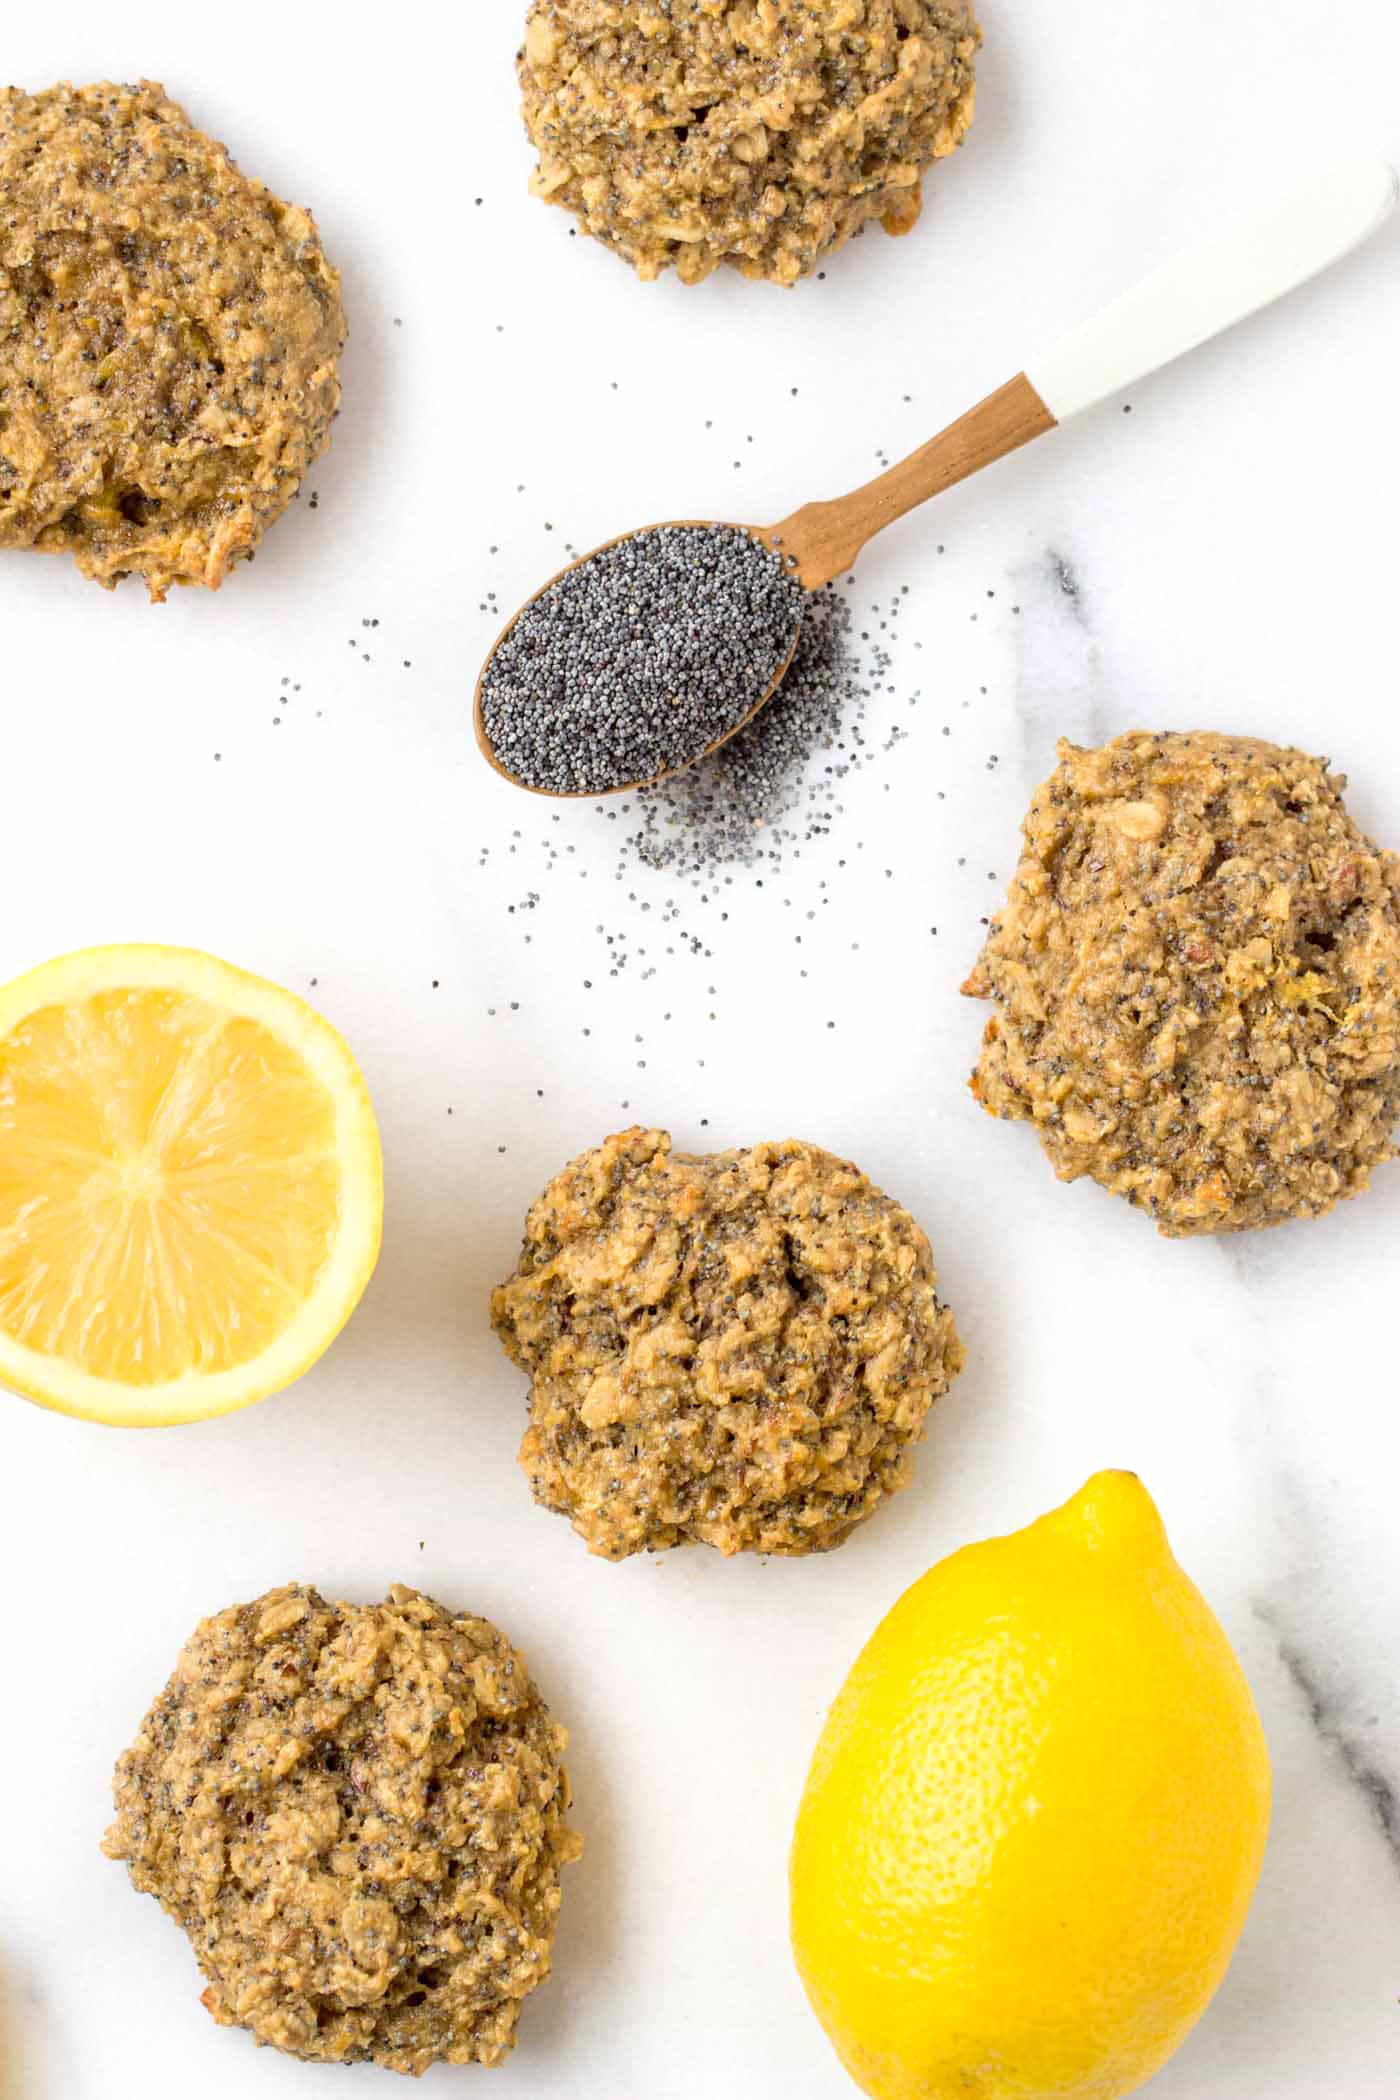 Lemon Poppy Seed Breakfast Cookies...with quinoa, oats, flaxseed and cashew butter! [vegan + gluten-free]